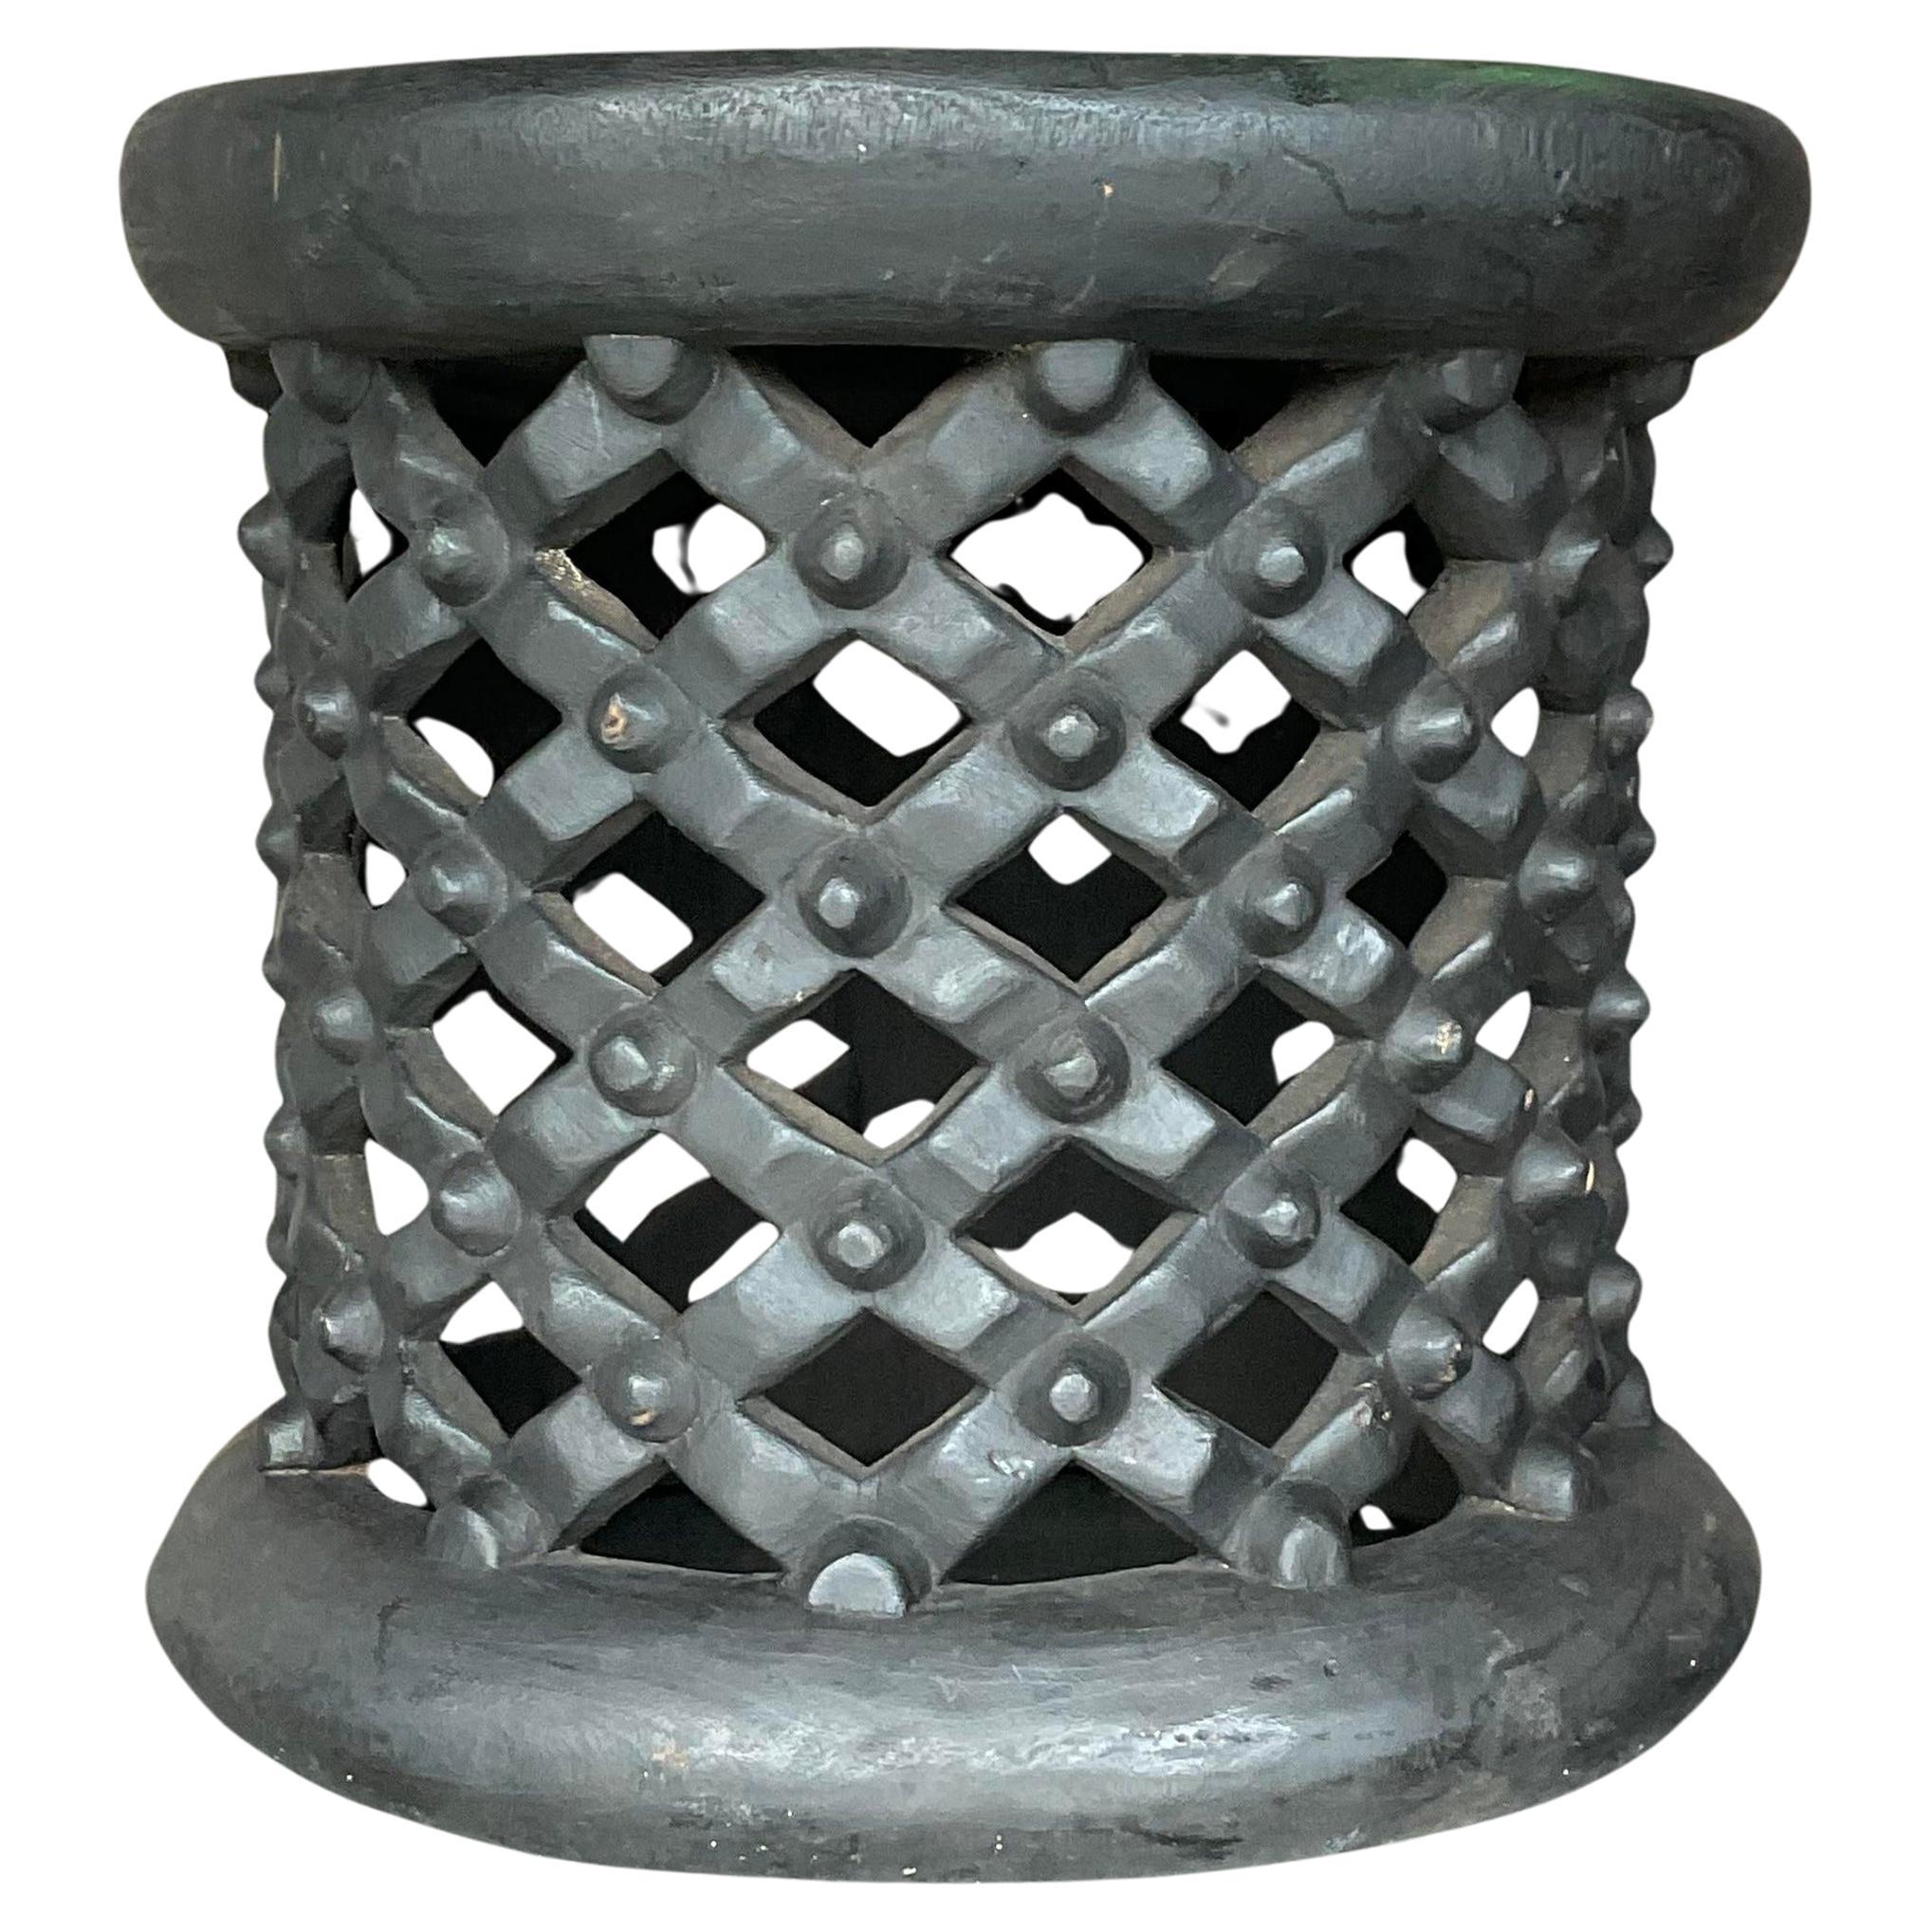 Boho Side Table Chic African Bambileke Style in a Deep Ebony Brown Finish